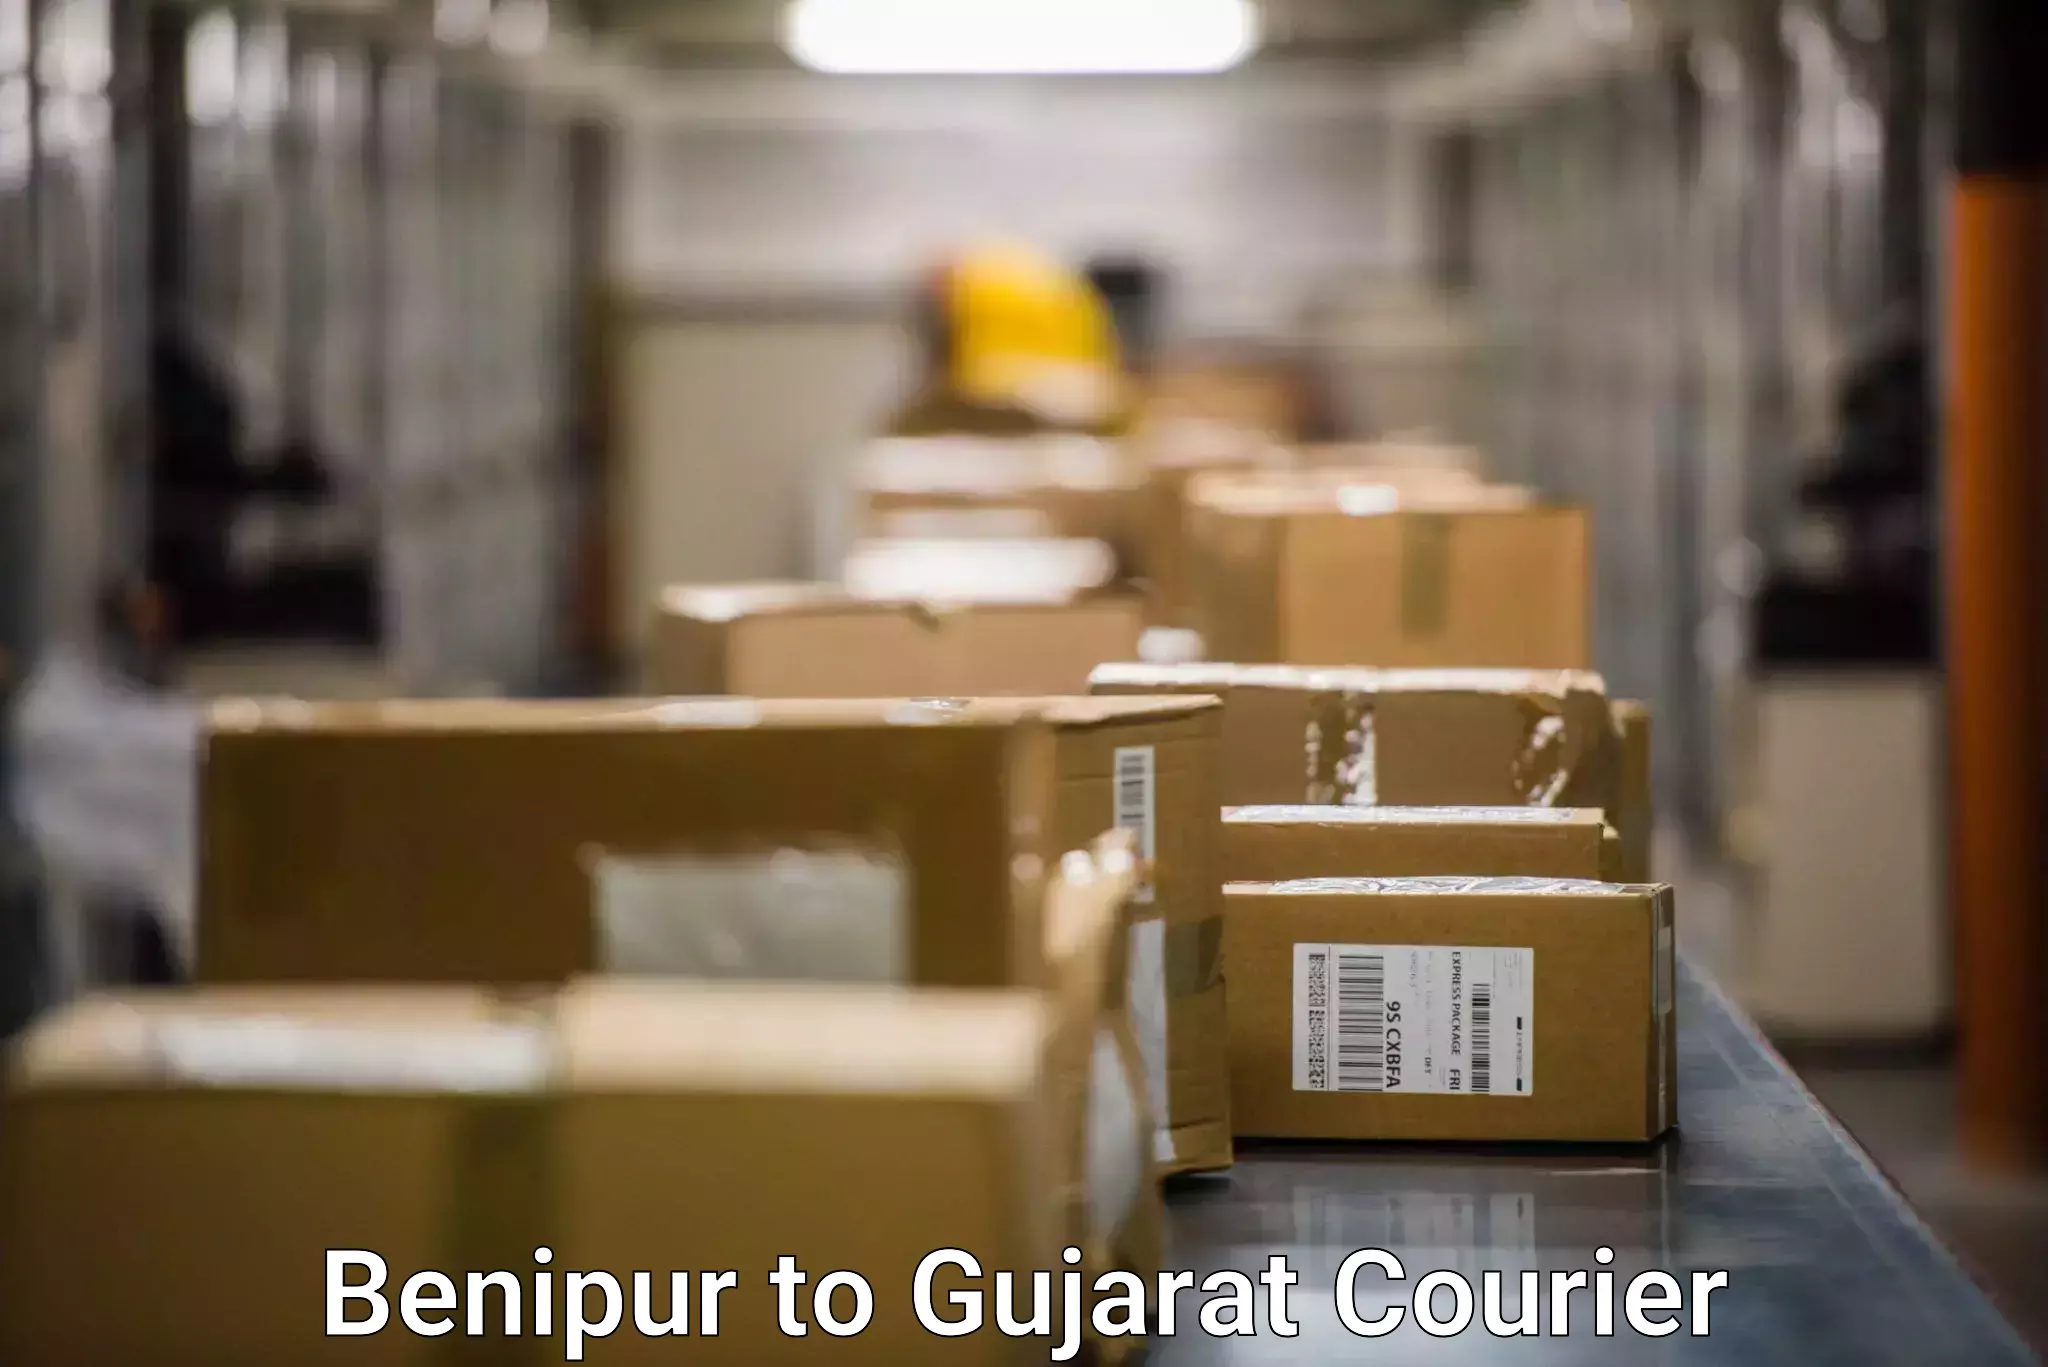 Comprehensive shipping strategies in Benipur to GIDC